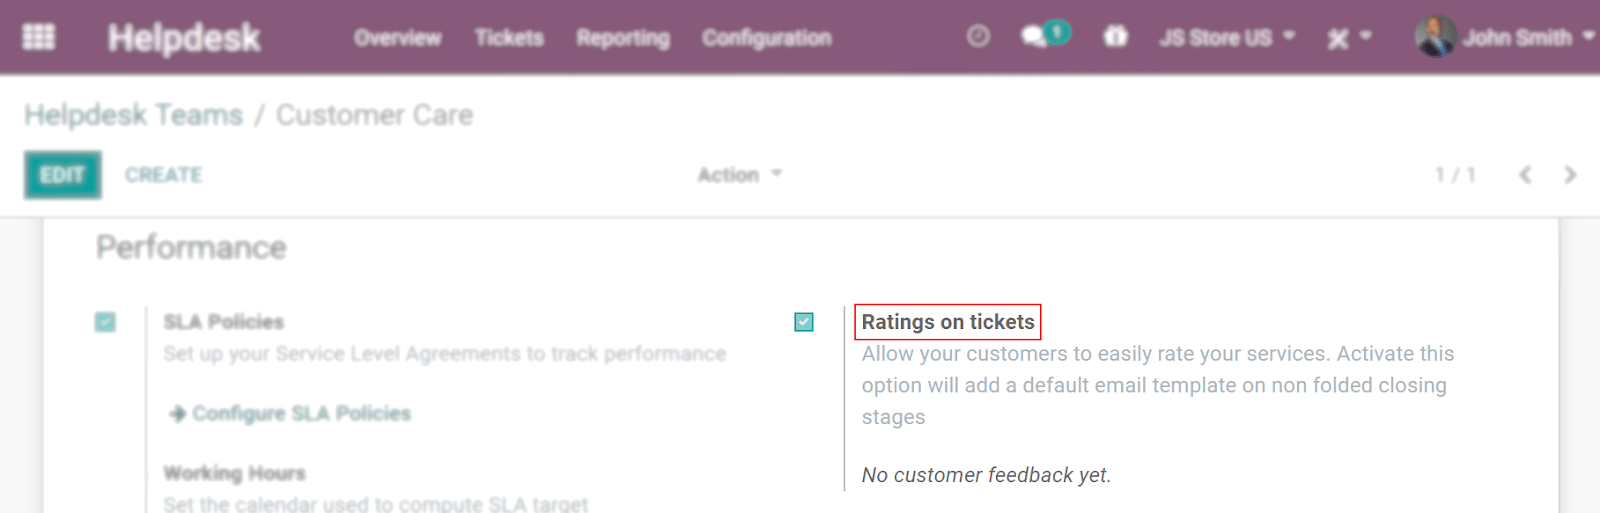 Overview of the settings page of a helpdesk team emphasizing the rating on ticket feature in Odoo Helpdesk